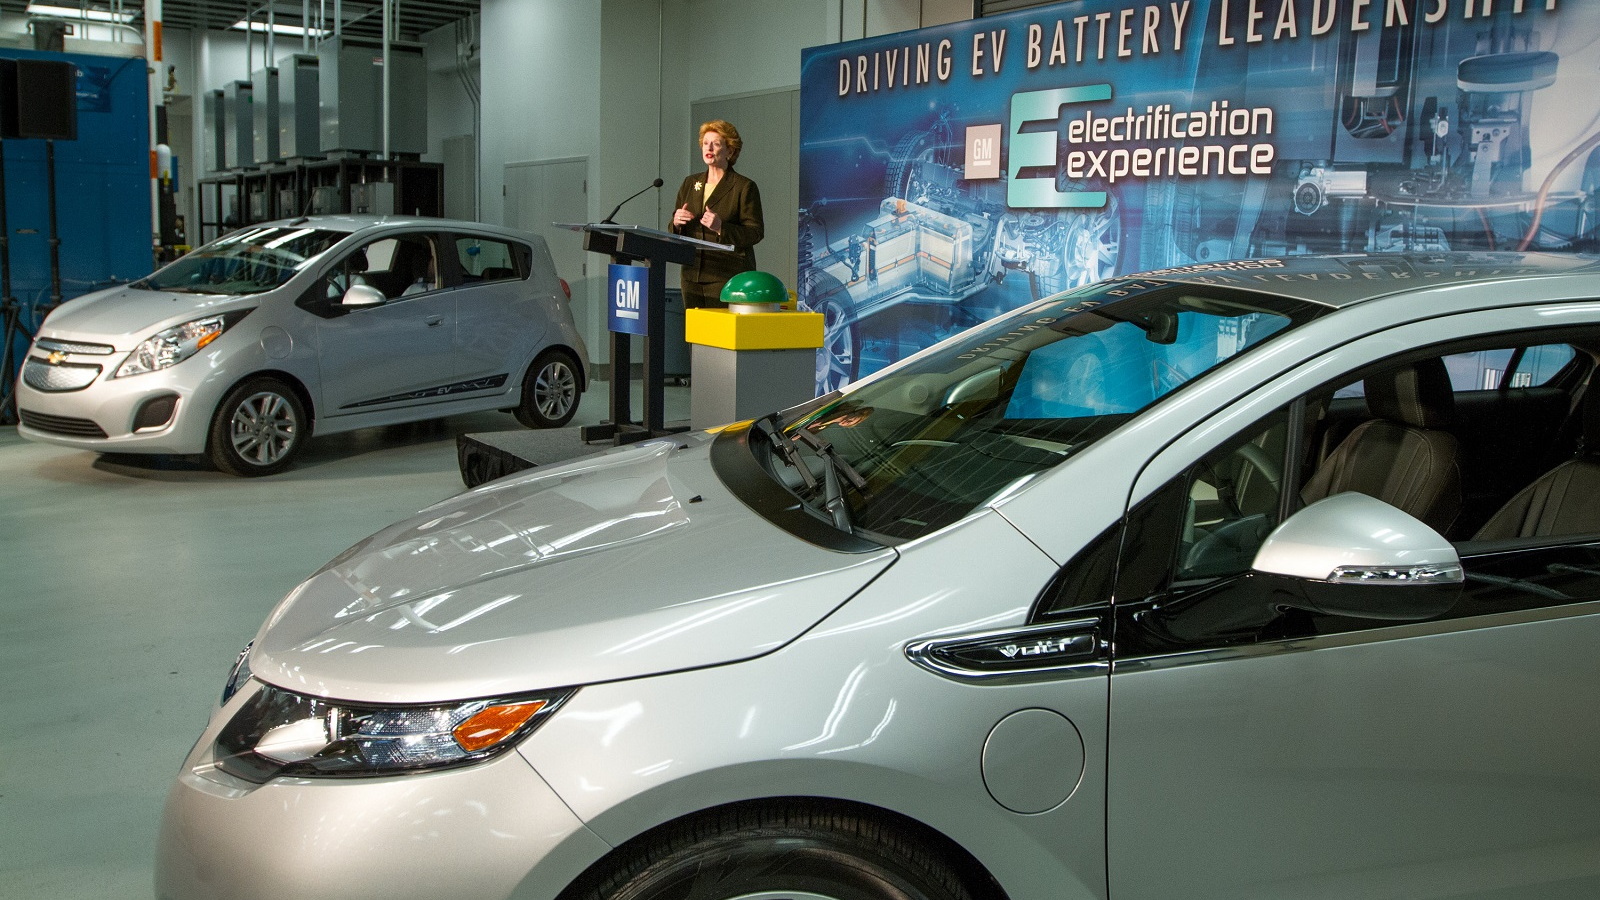 Chevy Volt and Spark EV with Sen. Debbie Stabenow as GM expands Global Battery Systems Lab, Sep 2013